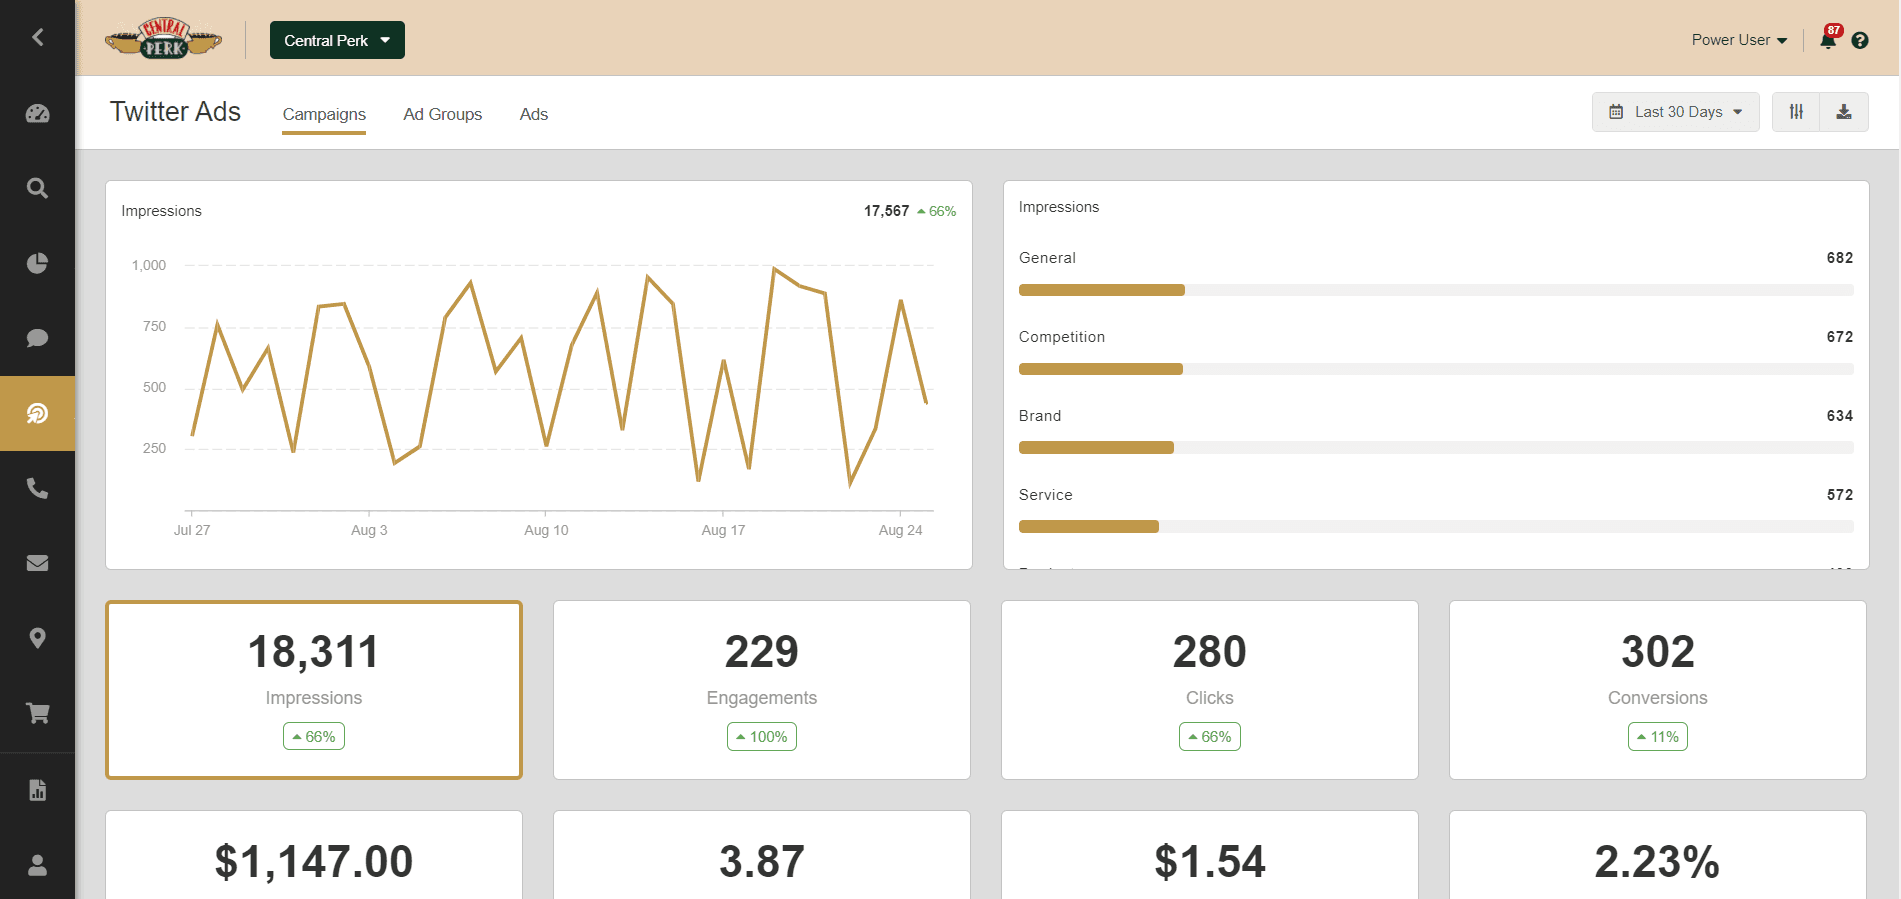 Twitter Ads Client Reporting Dashboard Example